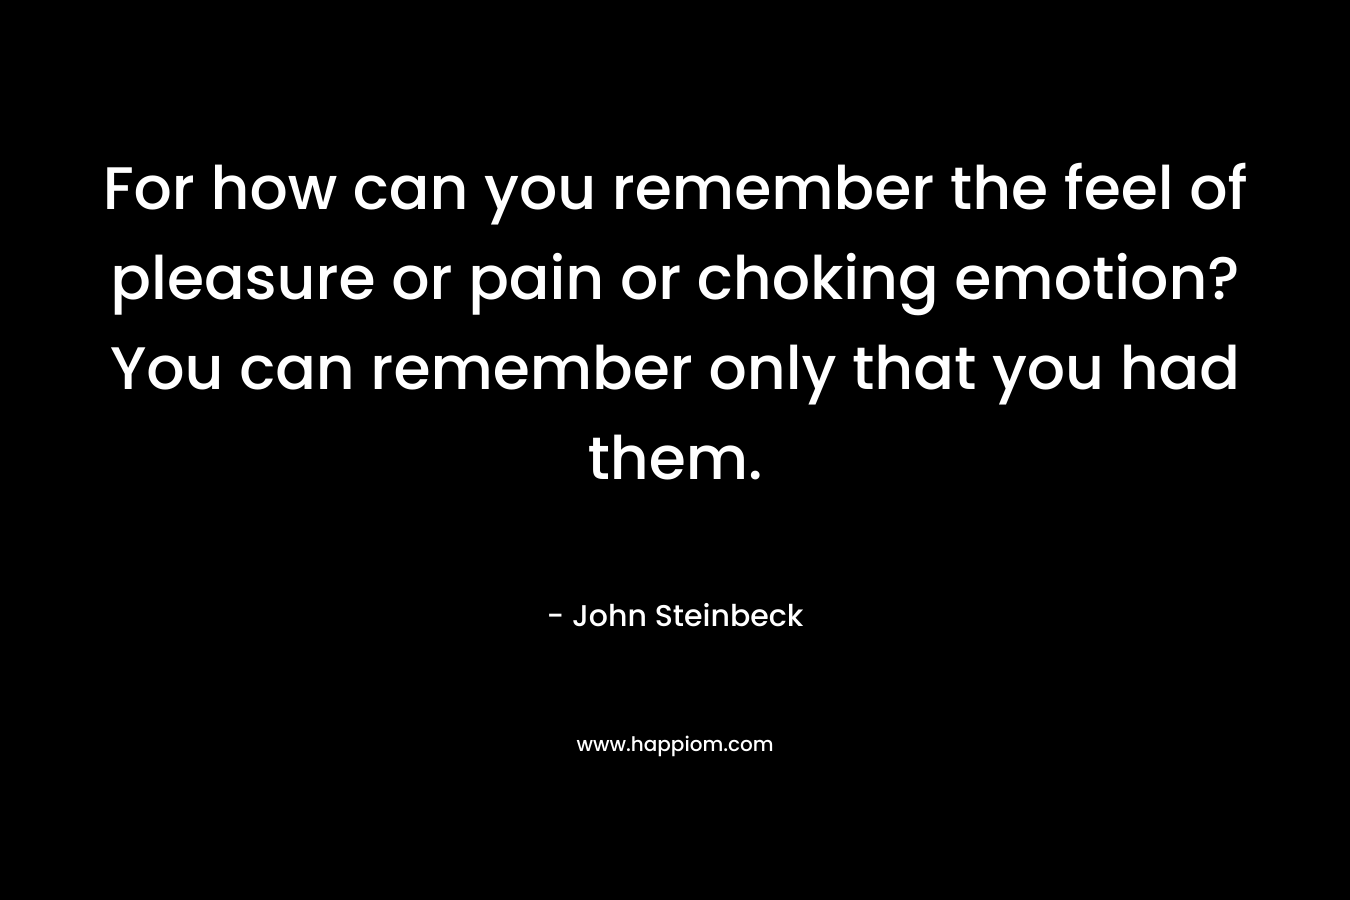 For how can you remember the feel of pleasure or pain or choking emotion? You can remember only that you had them. – John Steinbeck